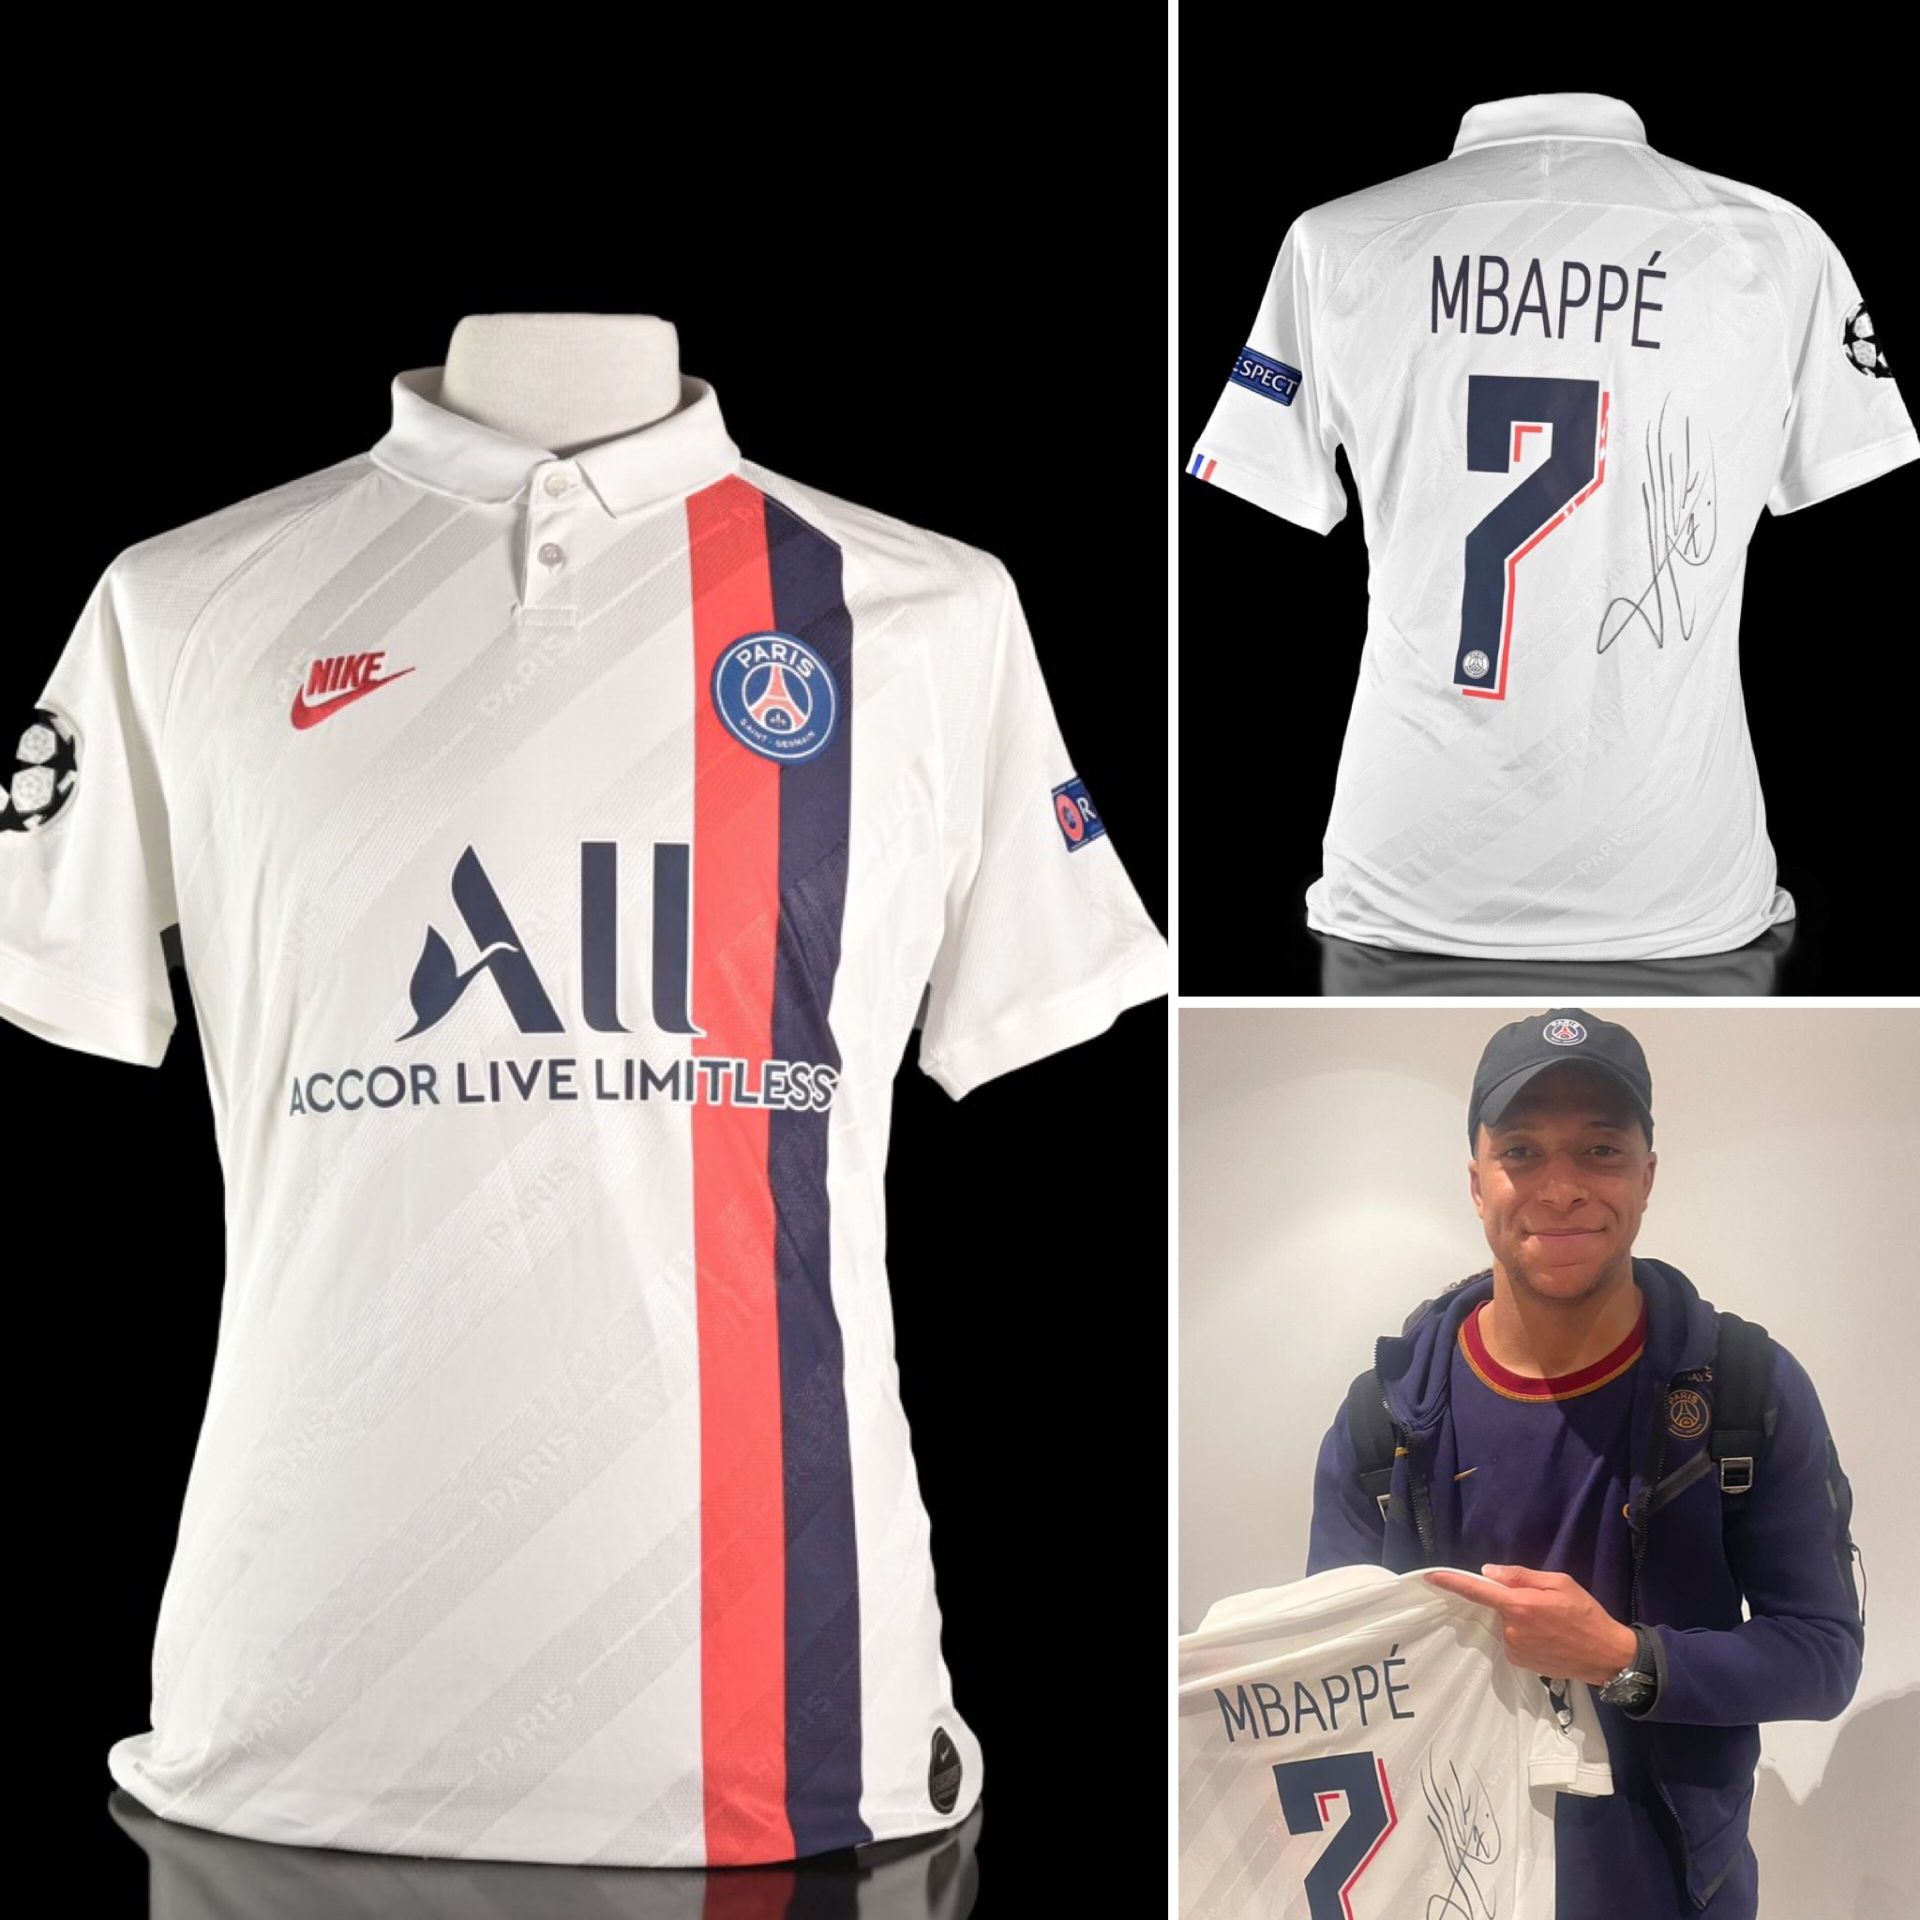 Null 2019 Champions League match shirt worn and signed by Kylian Mbappé - PSG, 2&hellip;